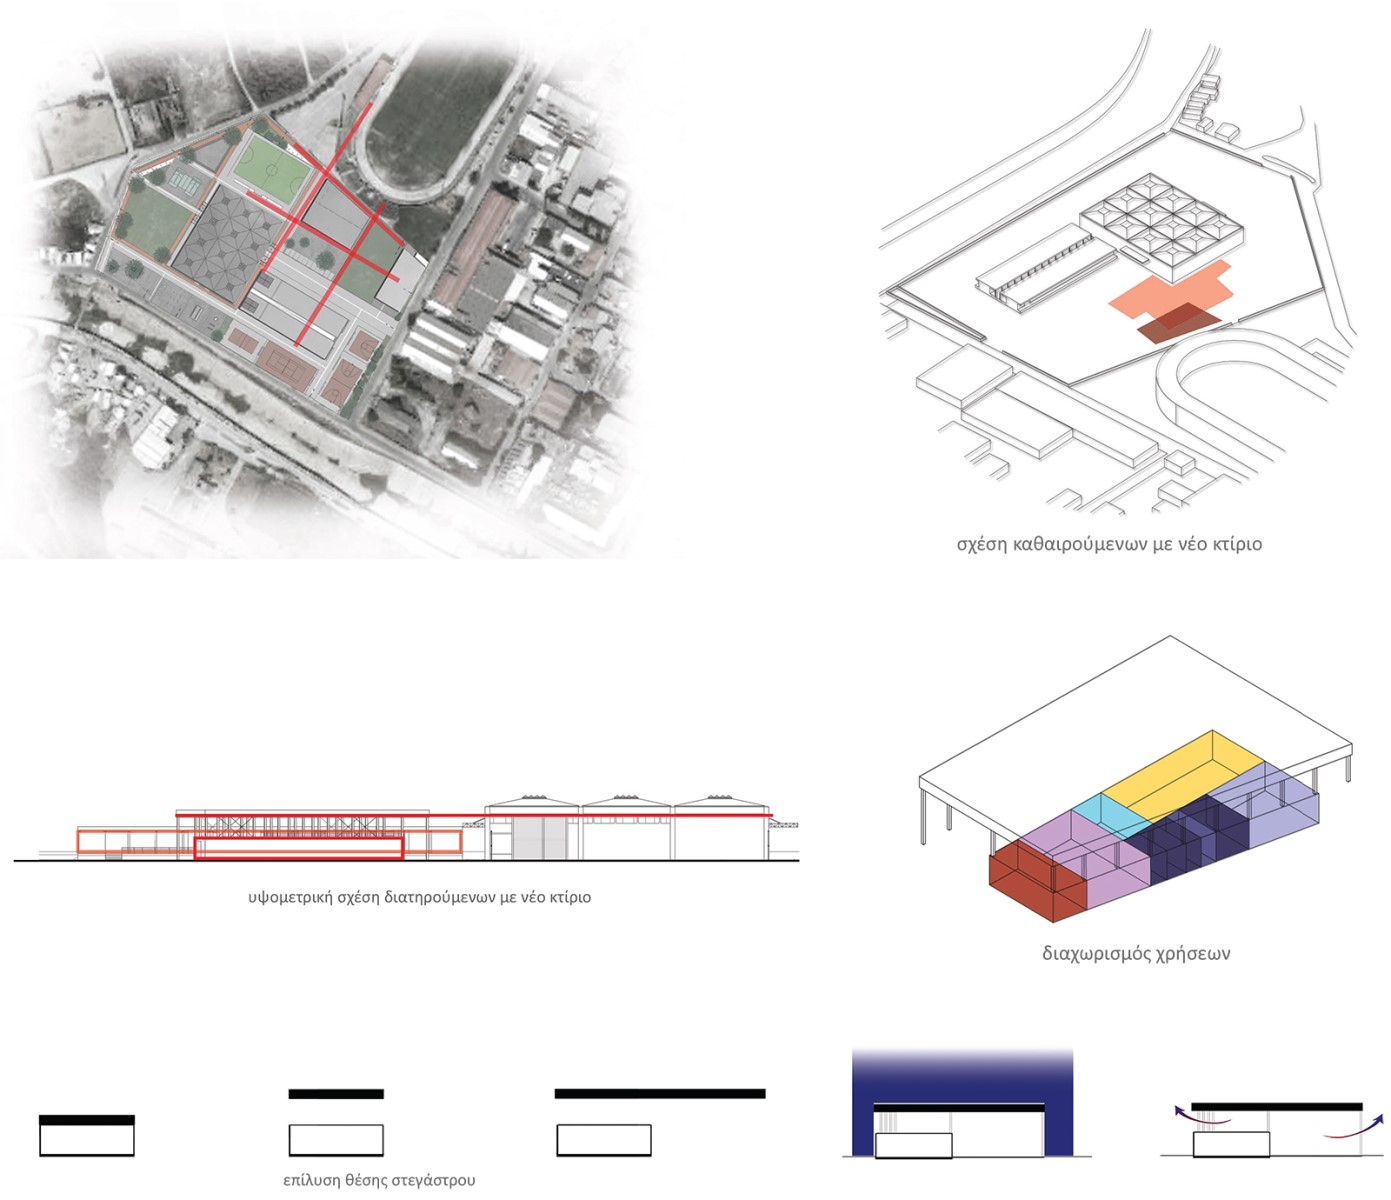 Archisearch Former Farmers’ Market Facilities in Neapoli: Creation of a Sports Center in the Municipality of Volos|Diploma thesis by Georgia Ntoutsi